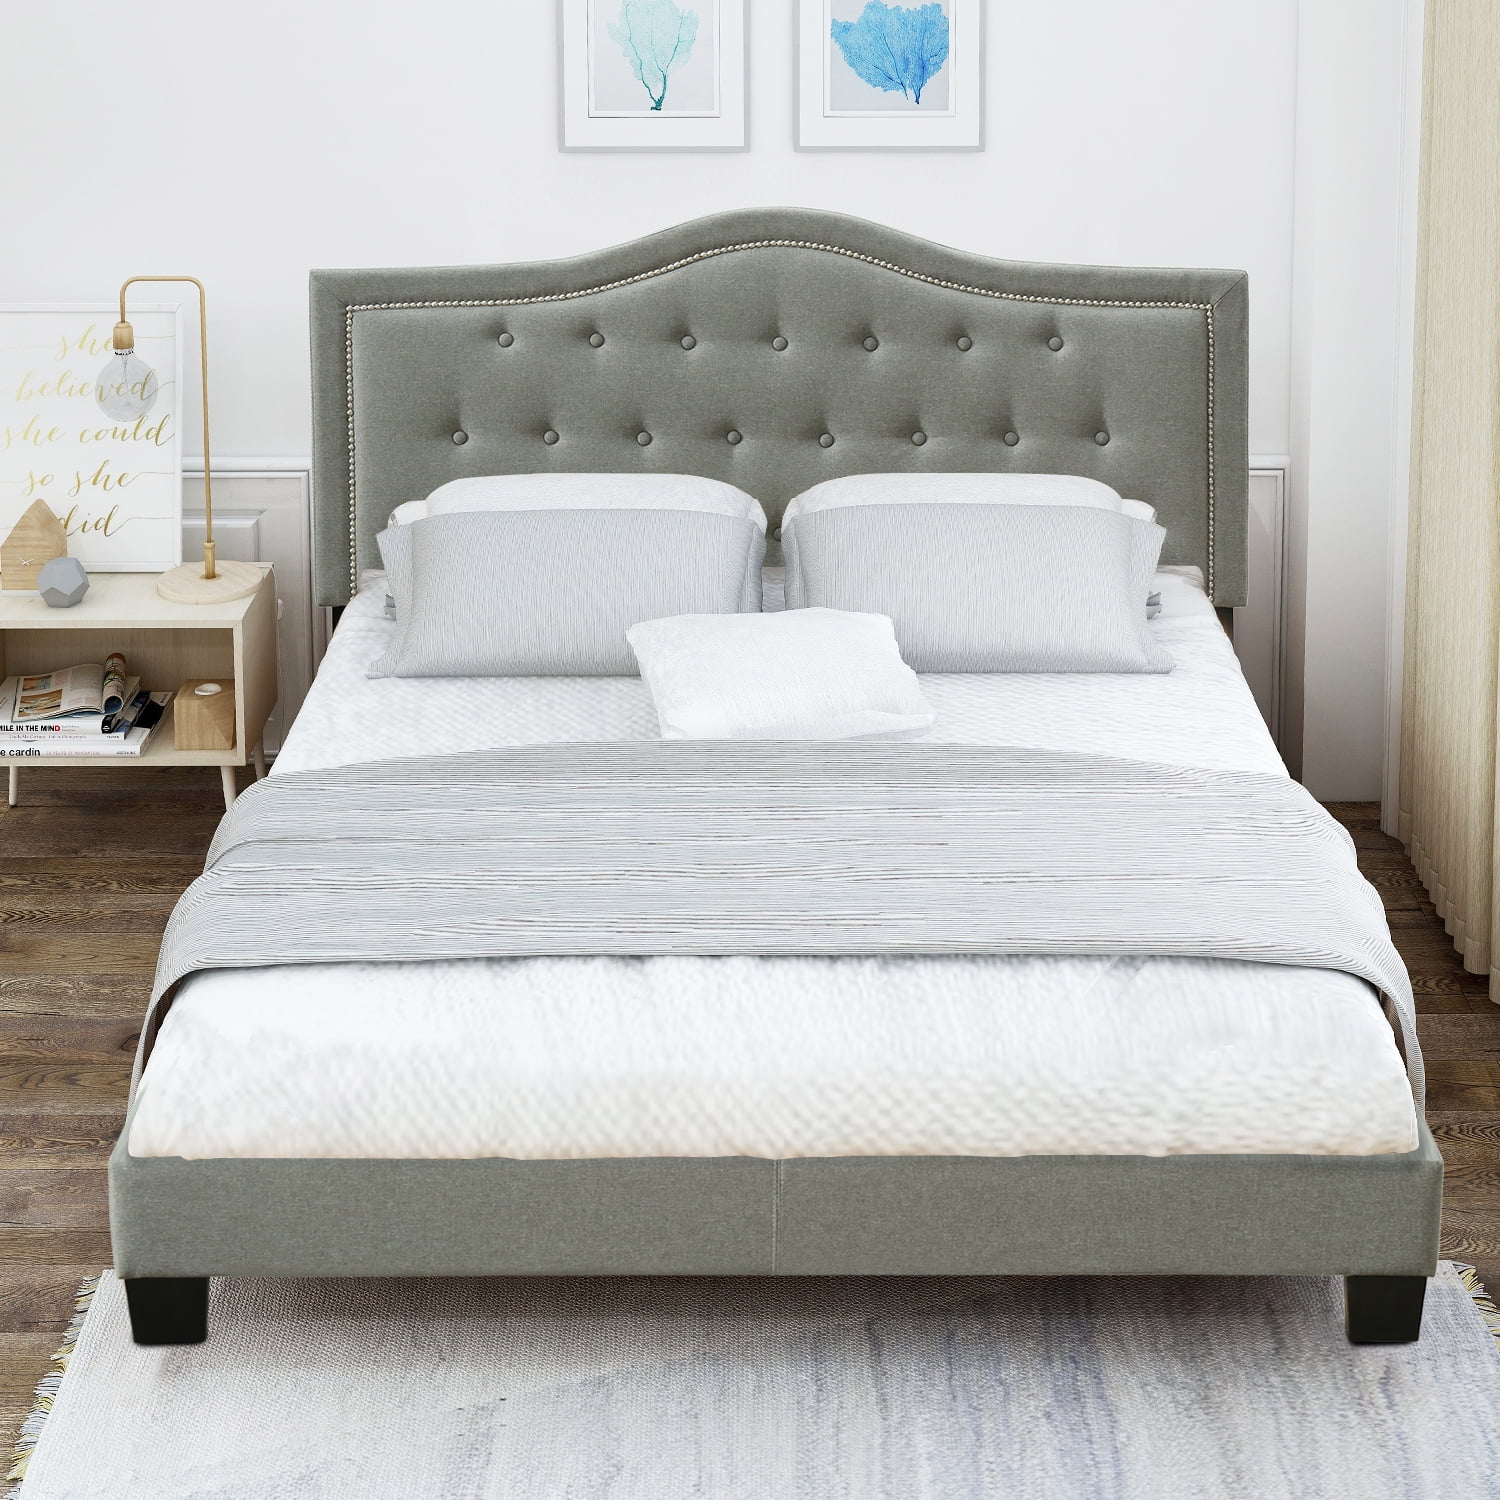 Clearance!Queen Platform Bed Frame with Headboard, Modern Upholstered